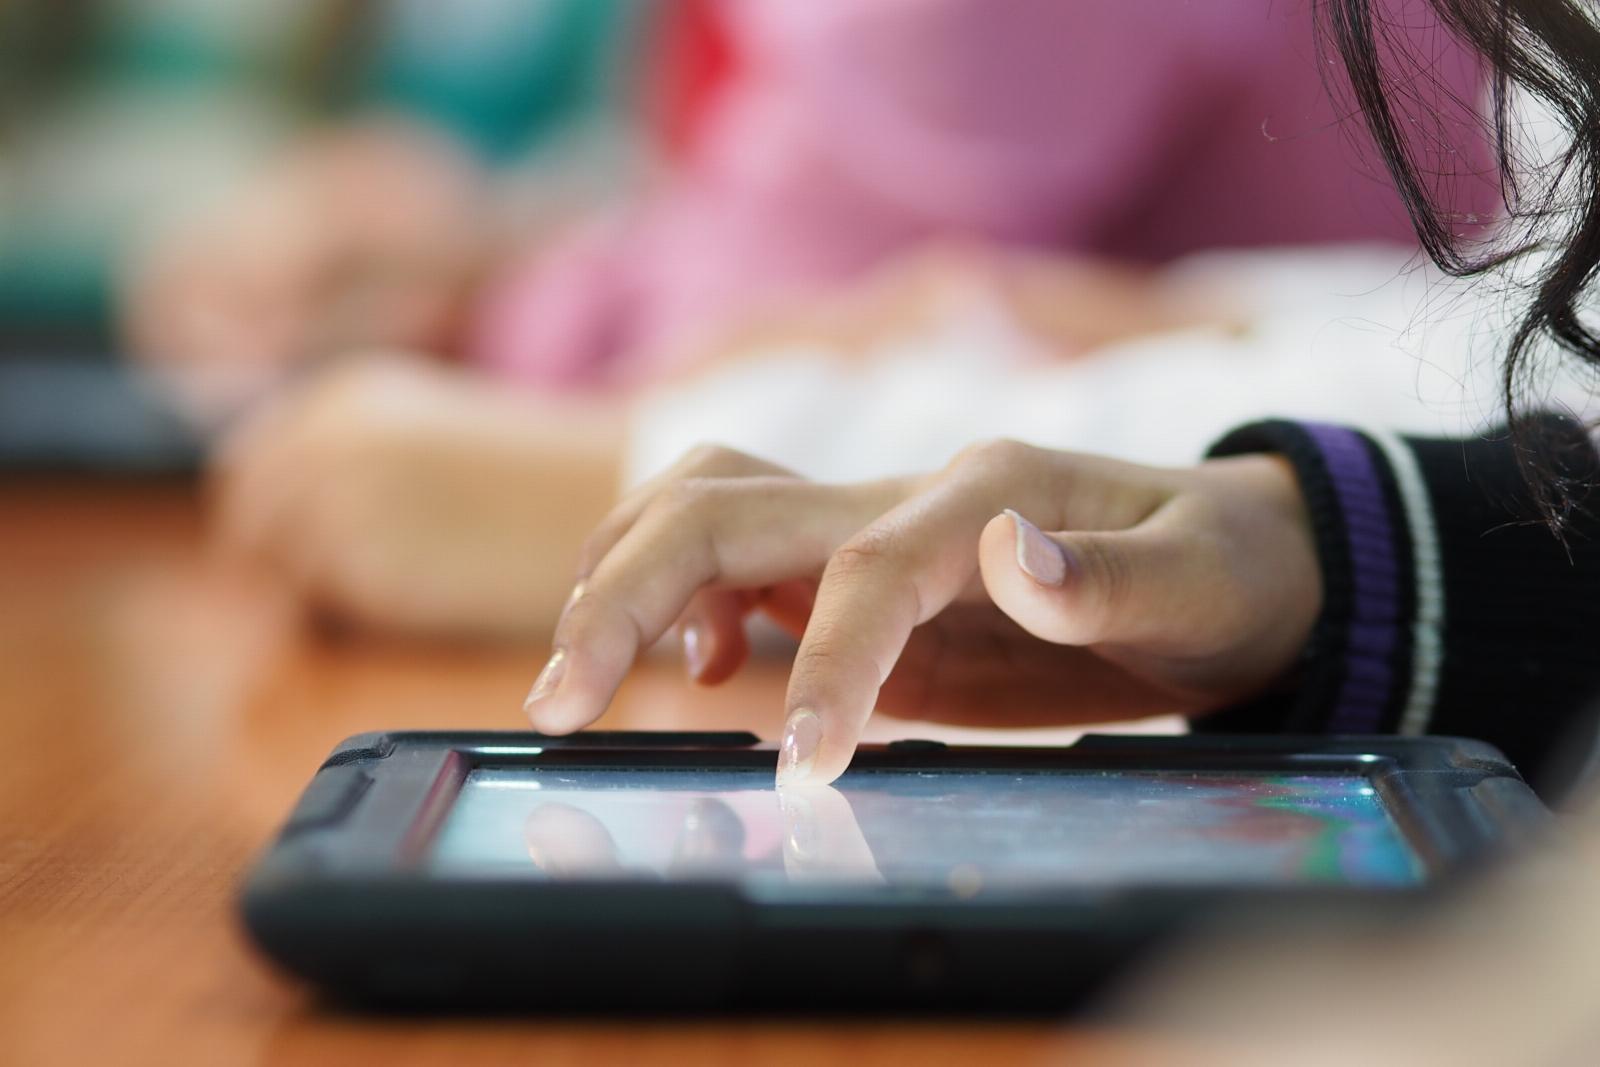 Children’s tablet has malware and exposes kids’ data, researcher finds